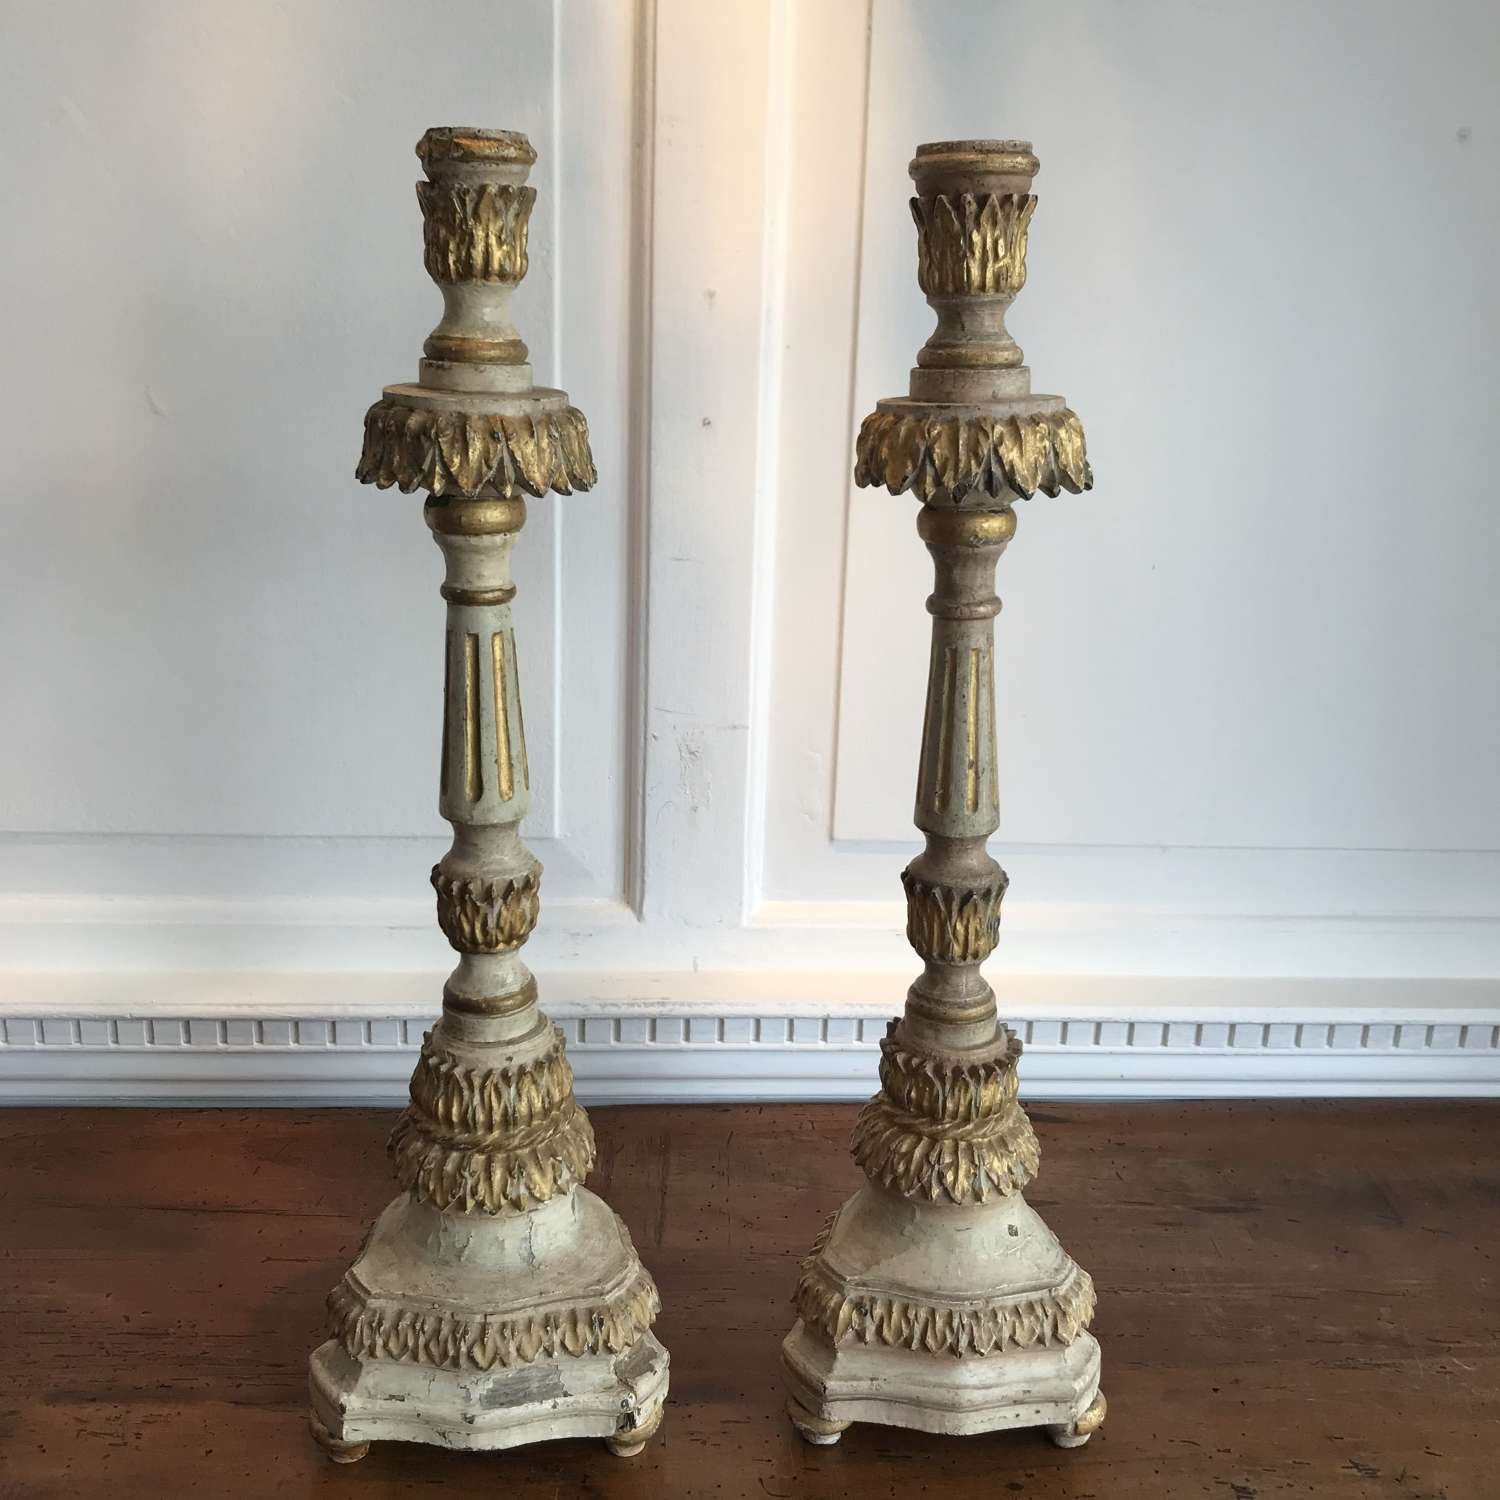 Carved and gilded Italian candlesticks 19th century